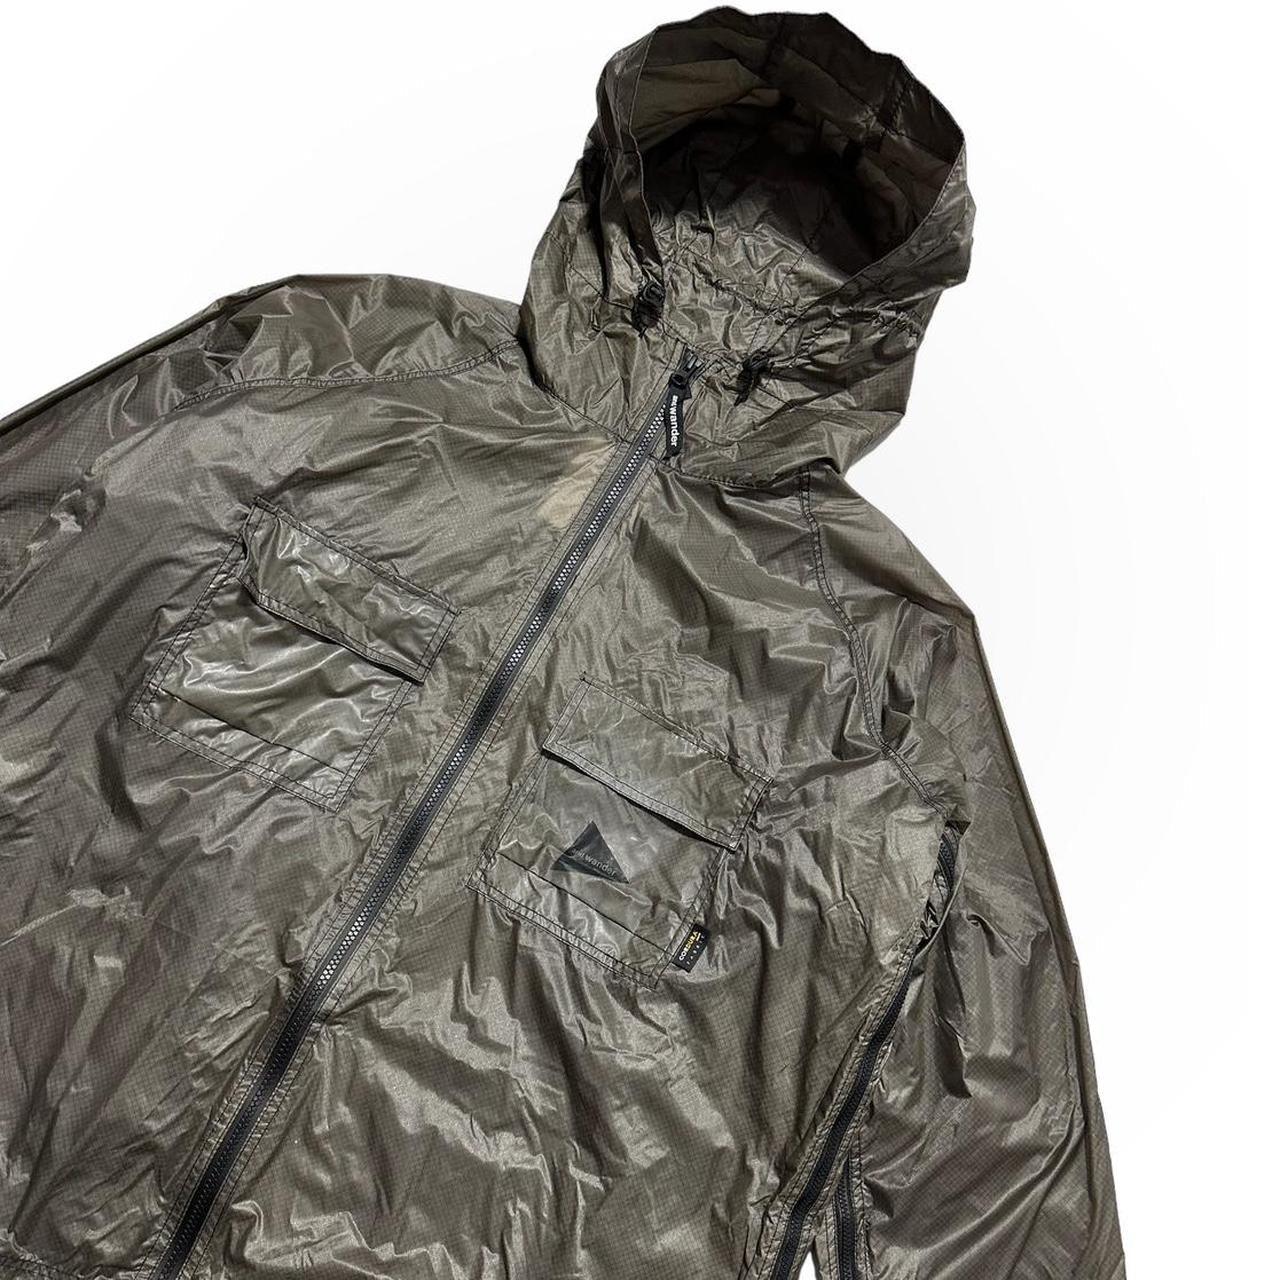 And Wander Packable Transformable Jacket Poncho - Known Source